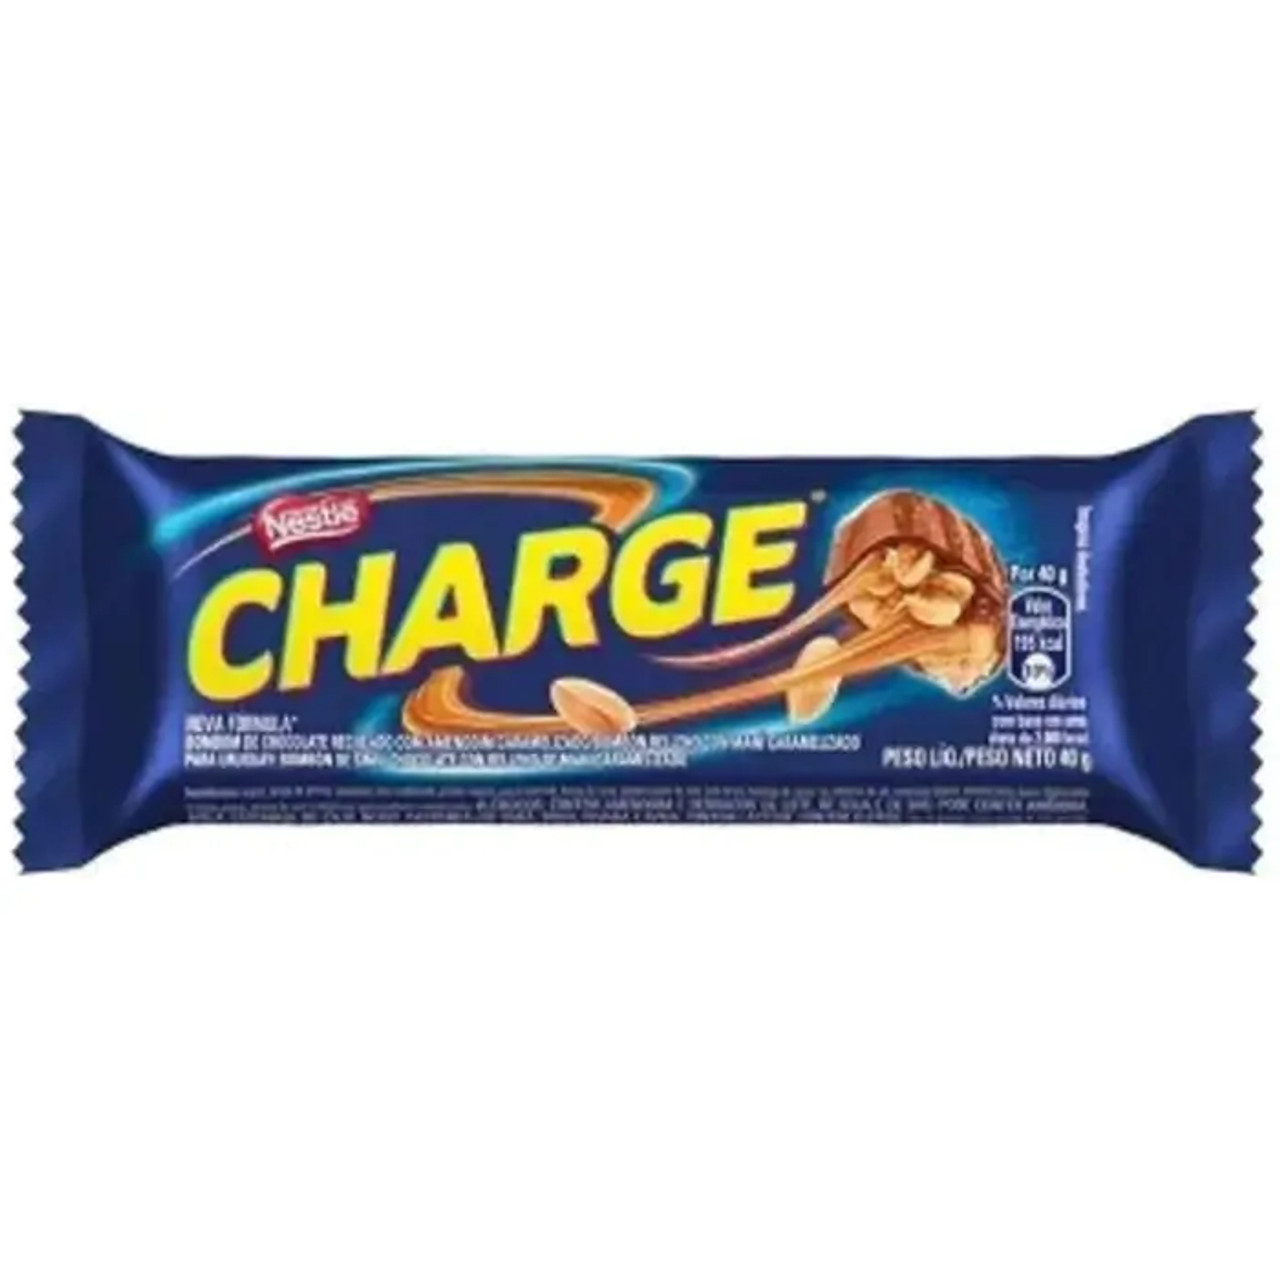 NESTLE Charge Caramel Peanut Chocolate Bar 30-CASE - 40g - Caramel and Peanuts - Chicken Pieces